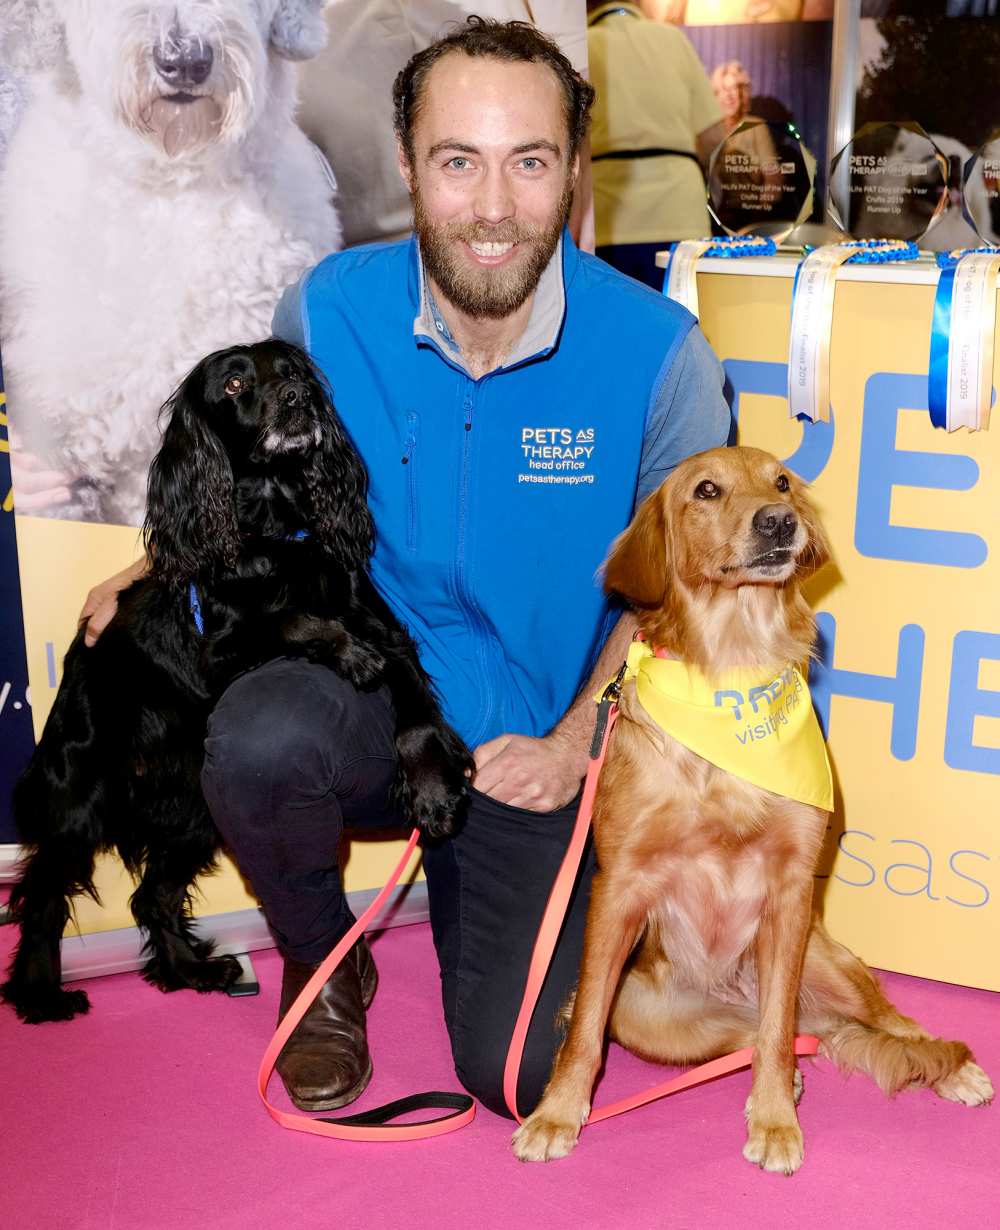 James-Middleton-on-the-Pets-As-Therapy-Stand-at-Crufts